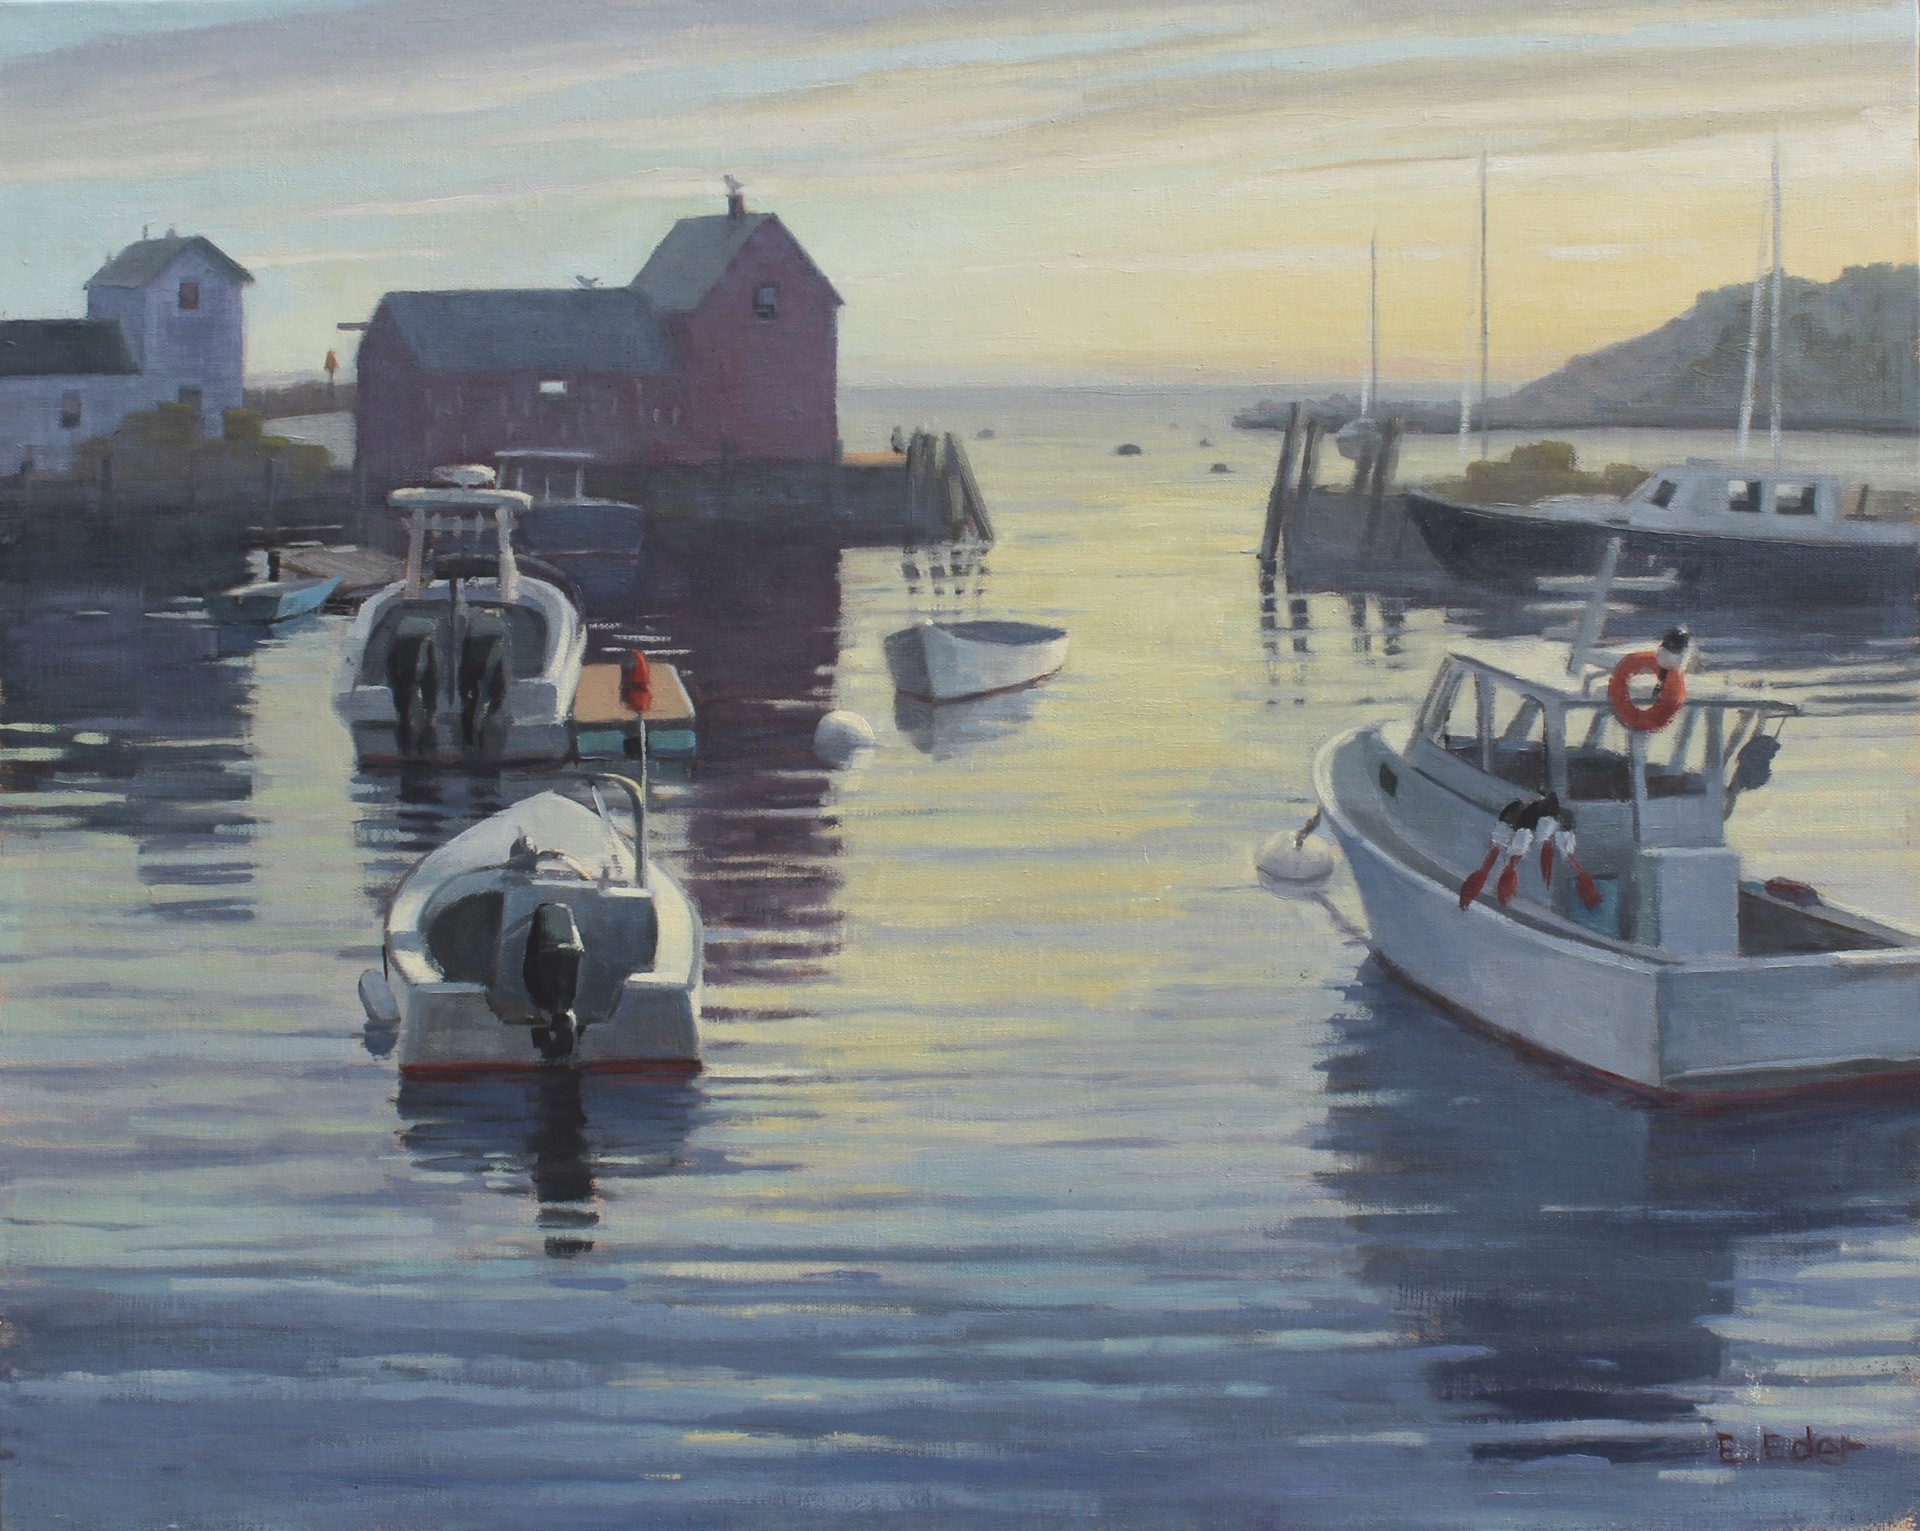 New Day, Rockport Harbor by Eileen Eder